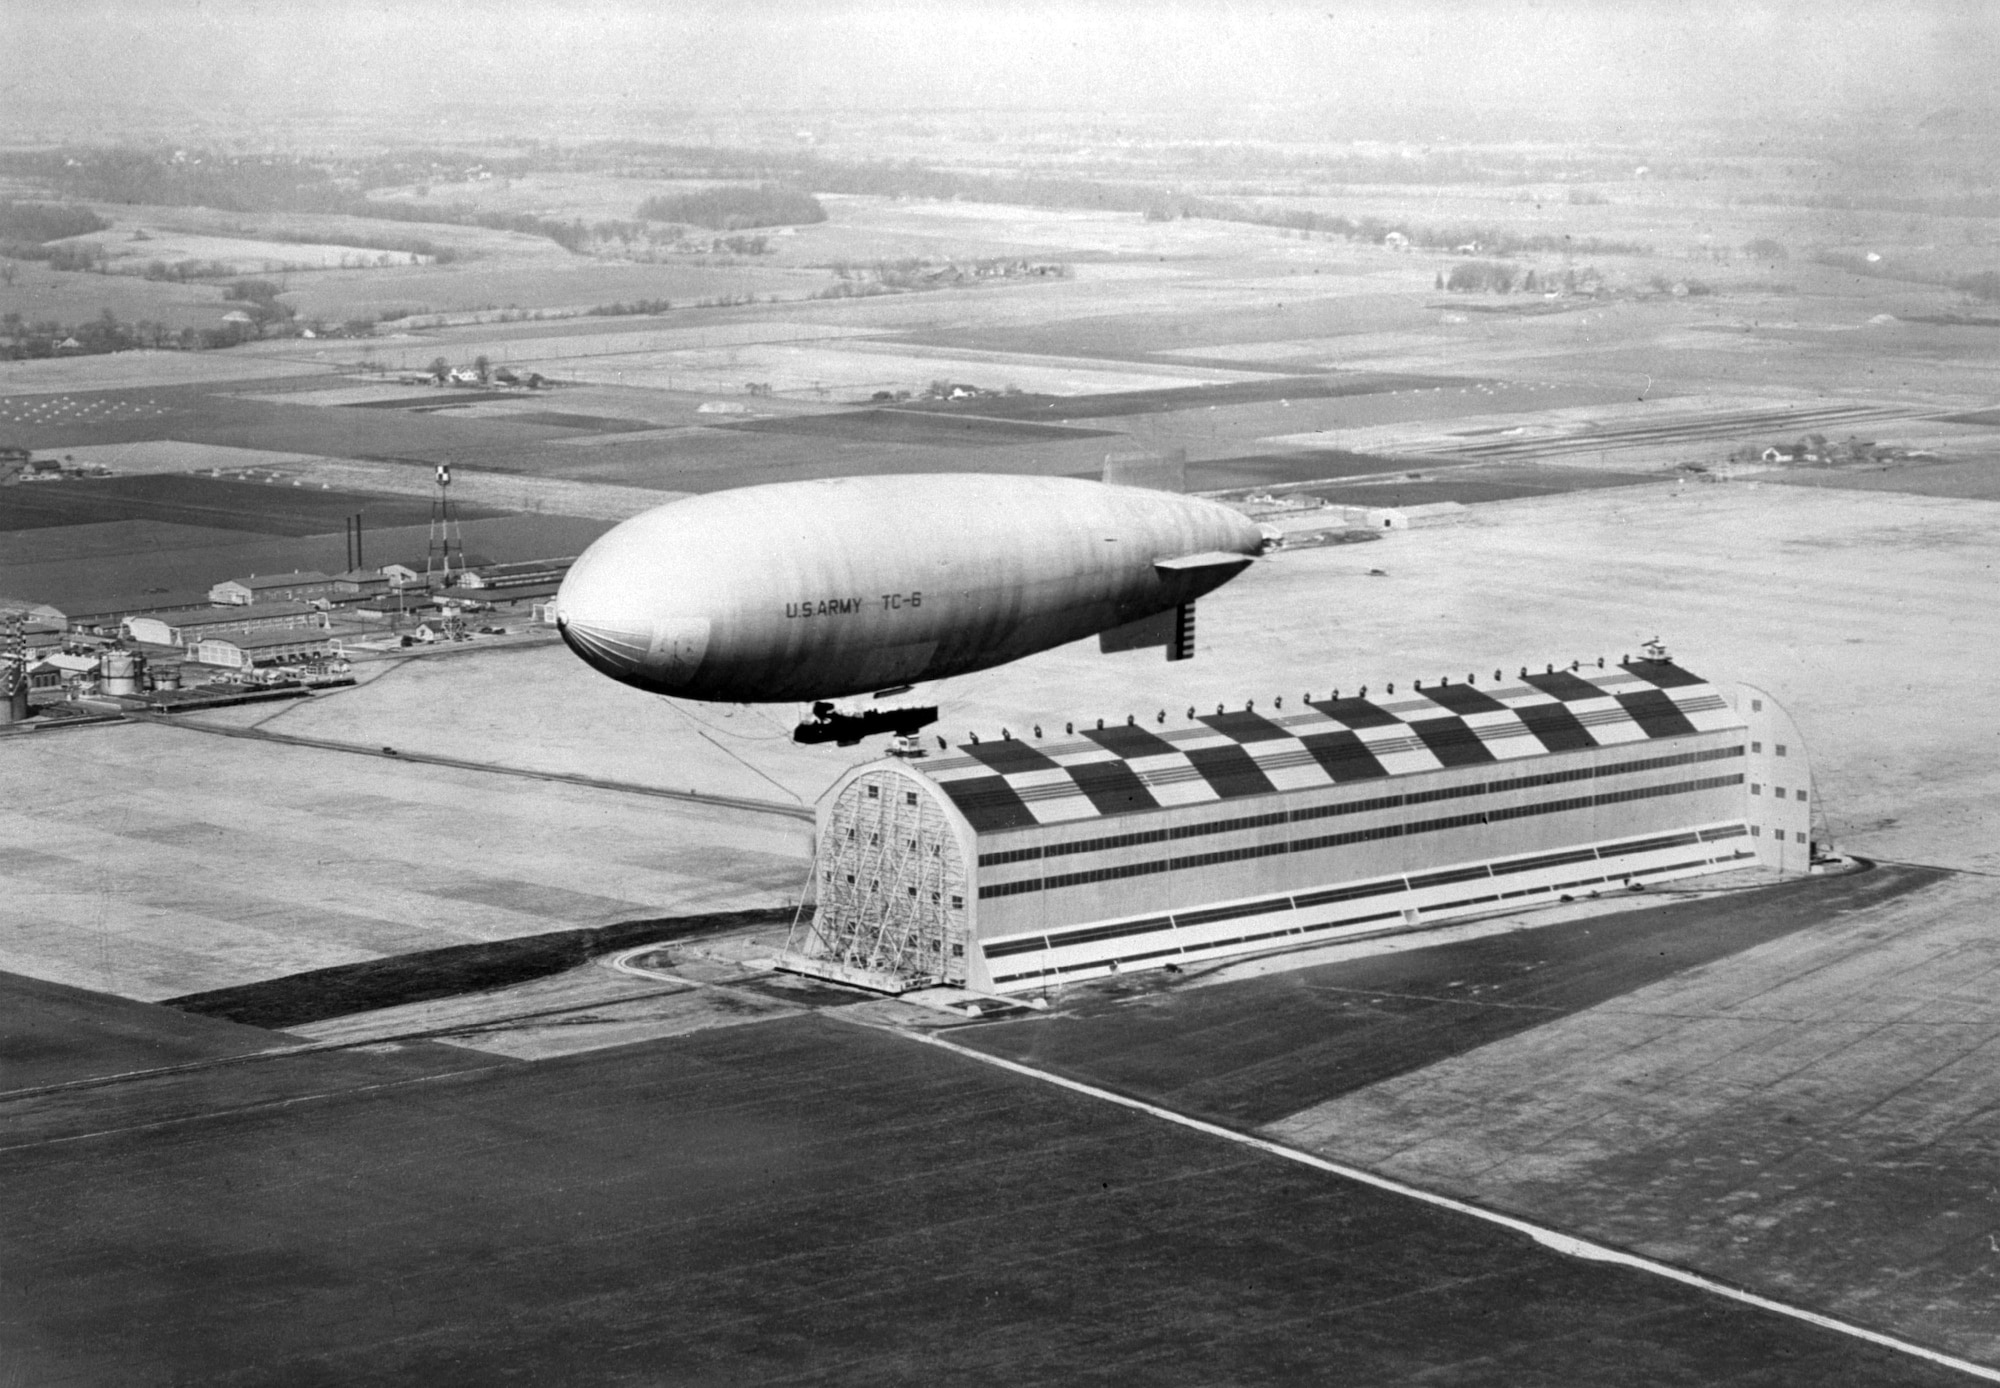 Dirigibles/Balloons, 1921-37: The 12th Balloon Company and 9th Airship Company transferred to Scott Field from Fort Omaha, Neb. Formal lighter-than-air aircraft courses began. At this time, Scott Field had balloons and two small non-rigid airships. Scott’s airships, such as the TC-6 (pictured here) were housed in a facility with the distinction of being the second largest hangar in the world until 1937.